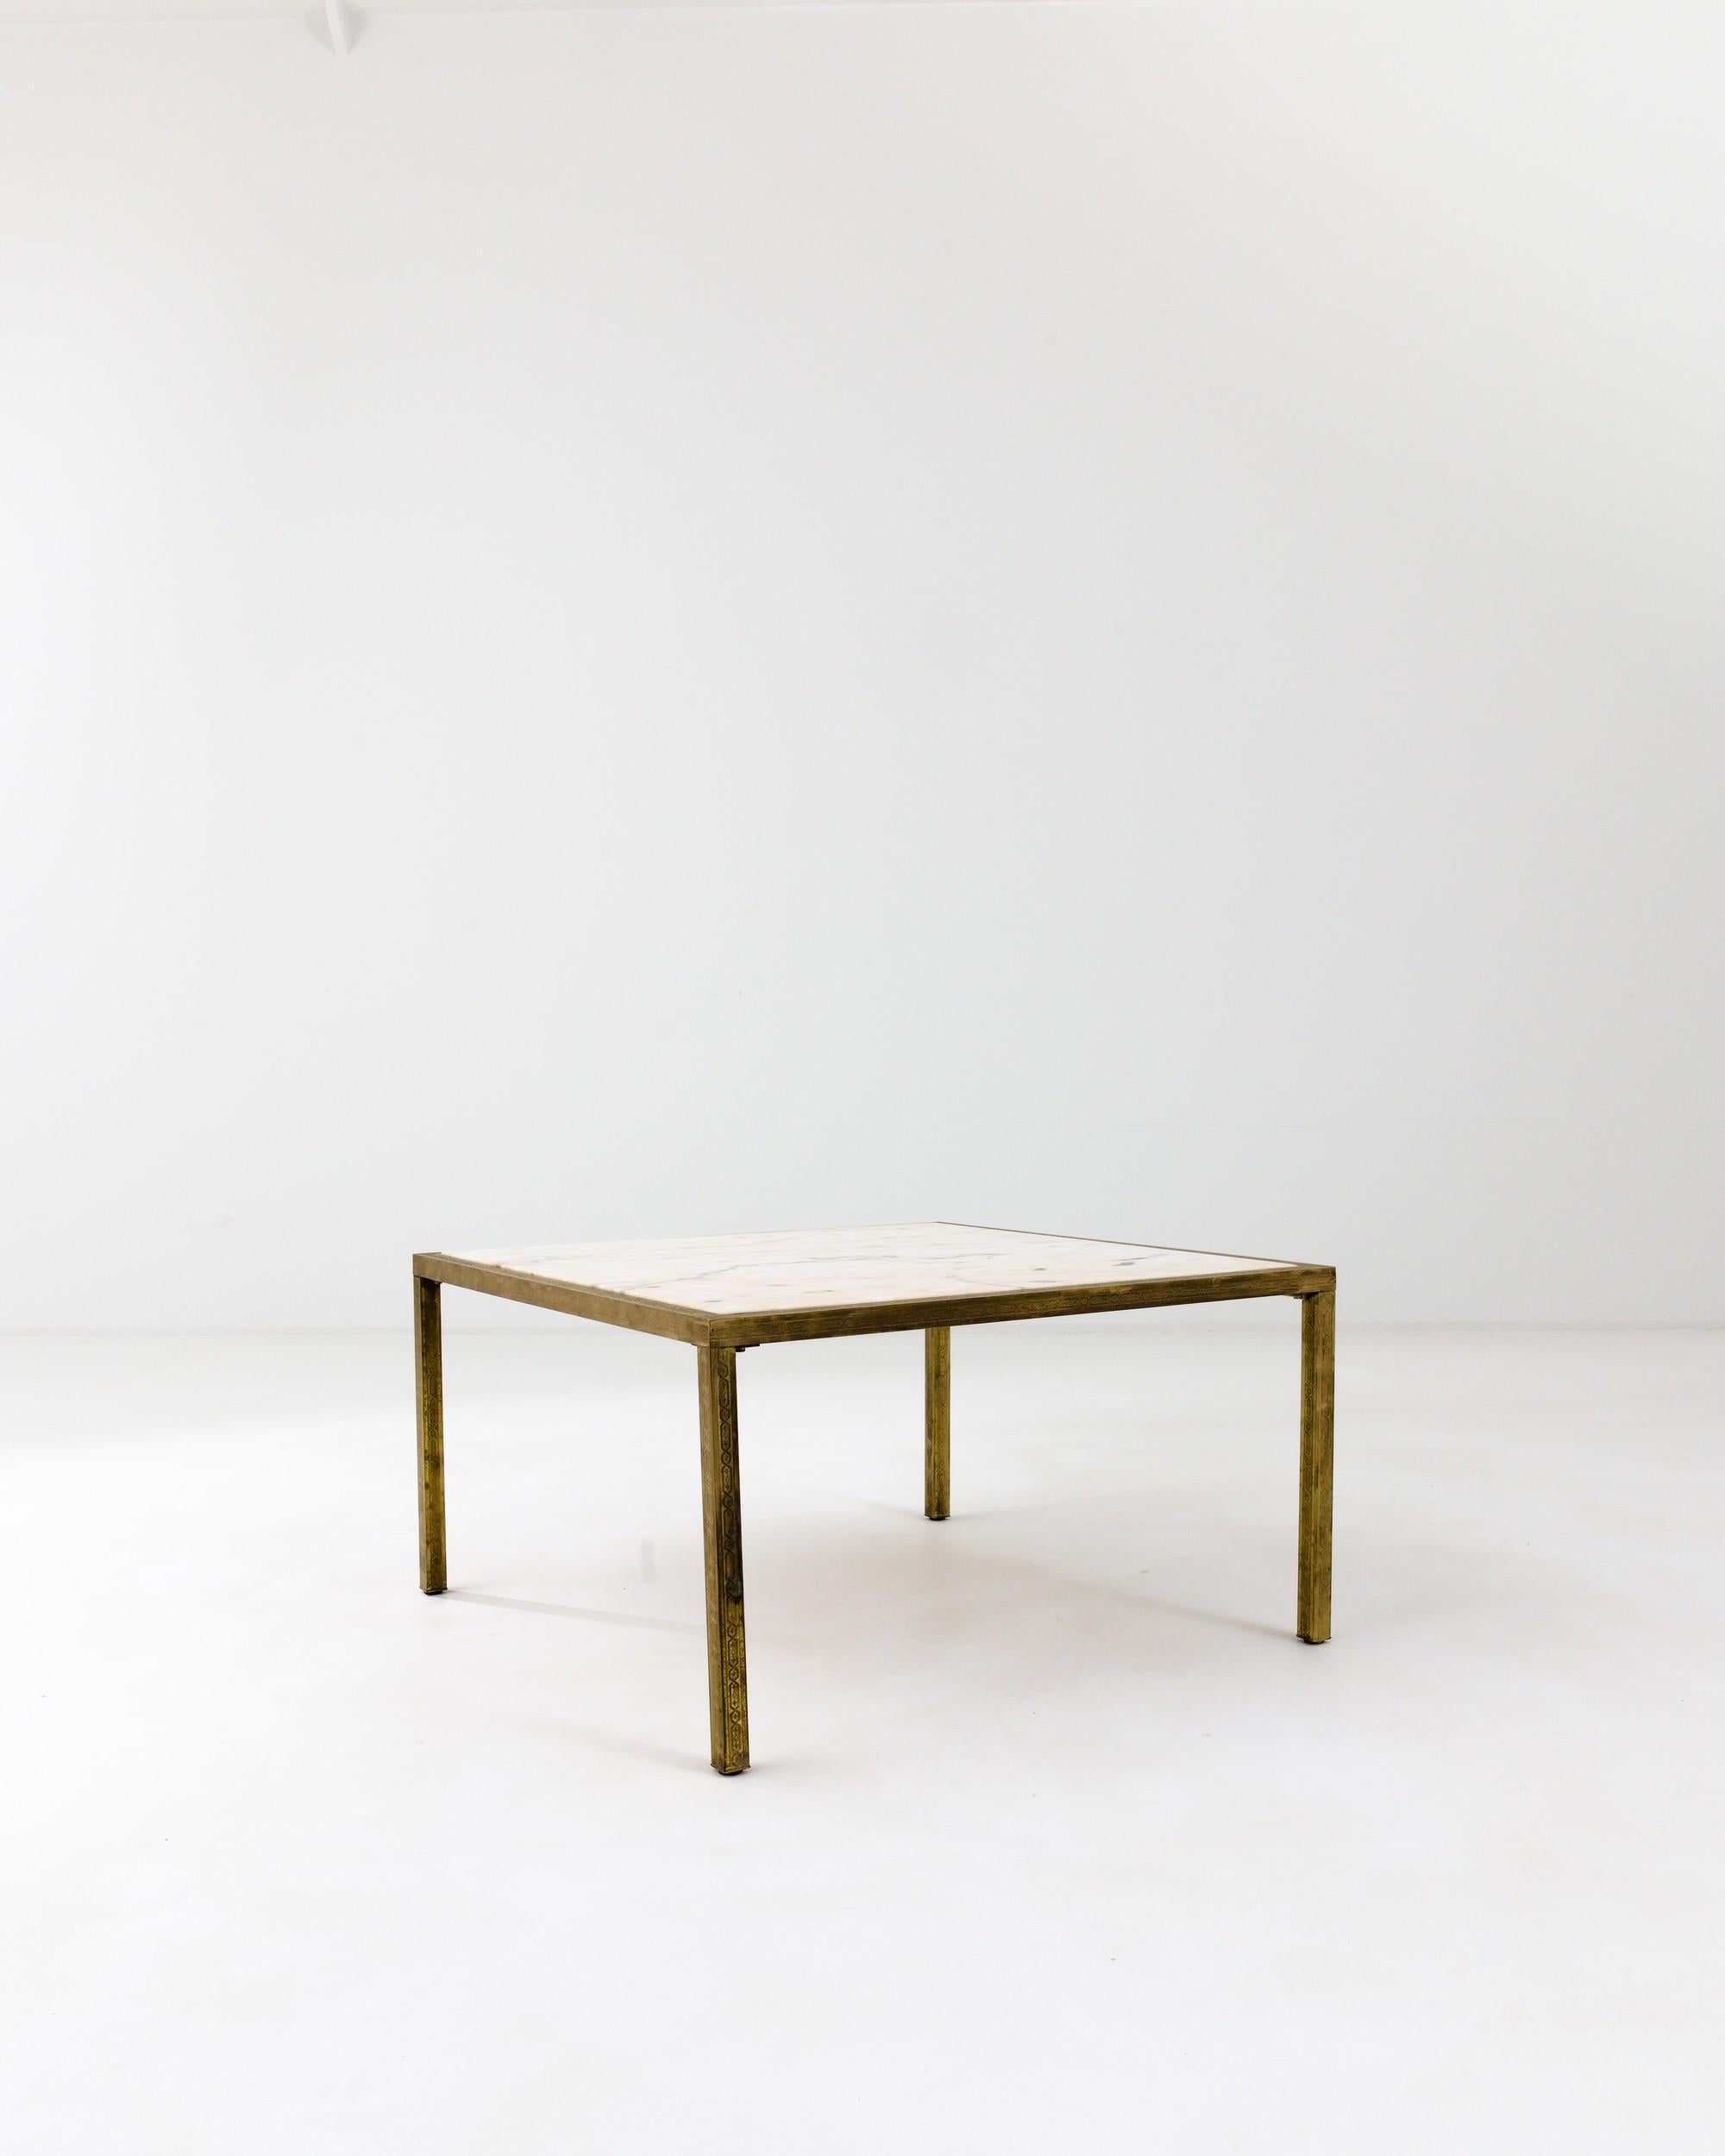 A geometric brass coffee table with marble top from 20th century France. The clever connection of brass legs craft a pleasing geometry. Tasteful molded details add an art nouveau sensibility to the table’s bold form, enhanced by a subtle patina